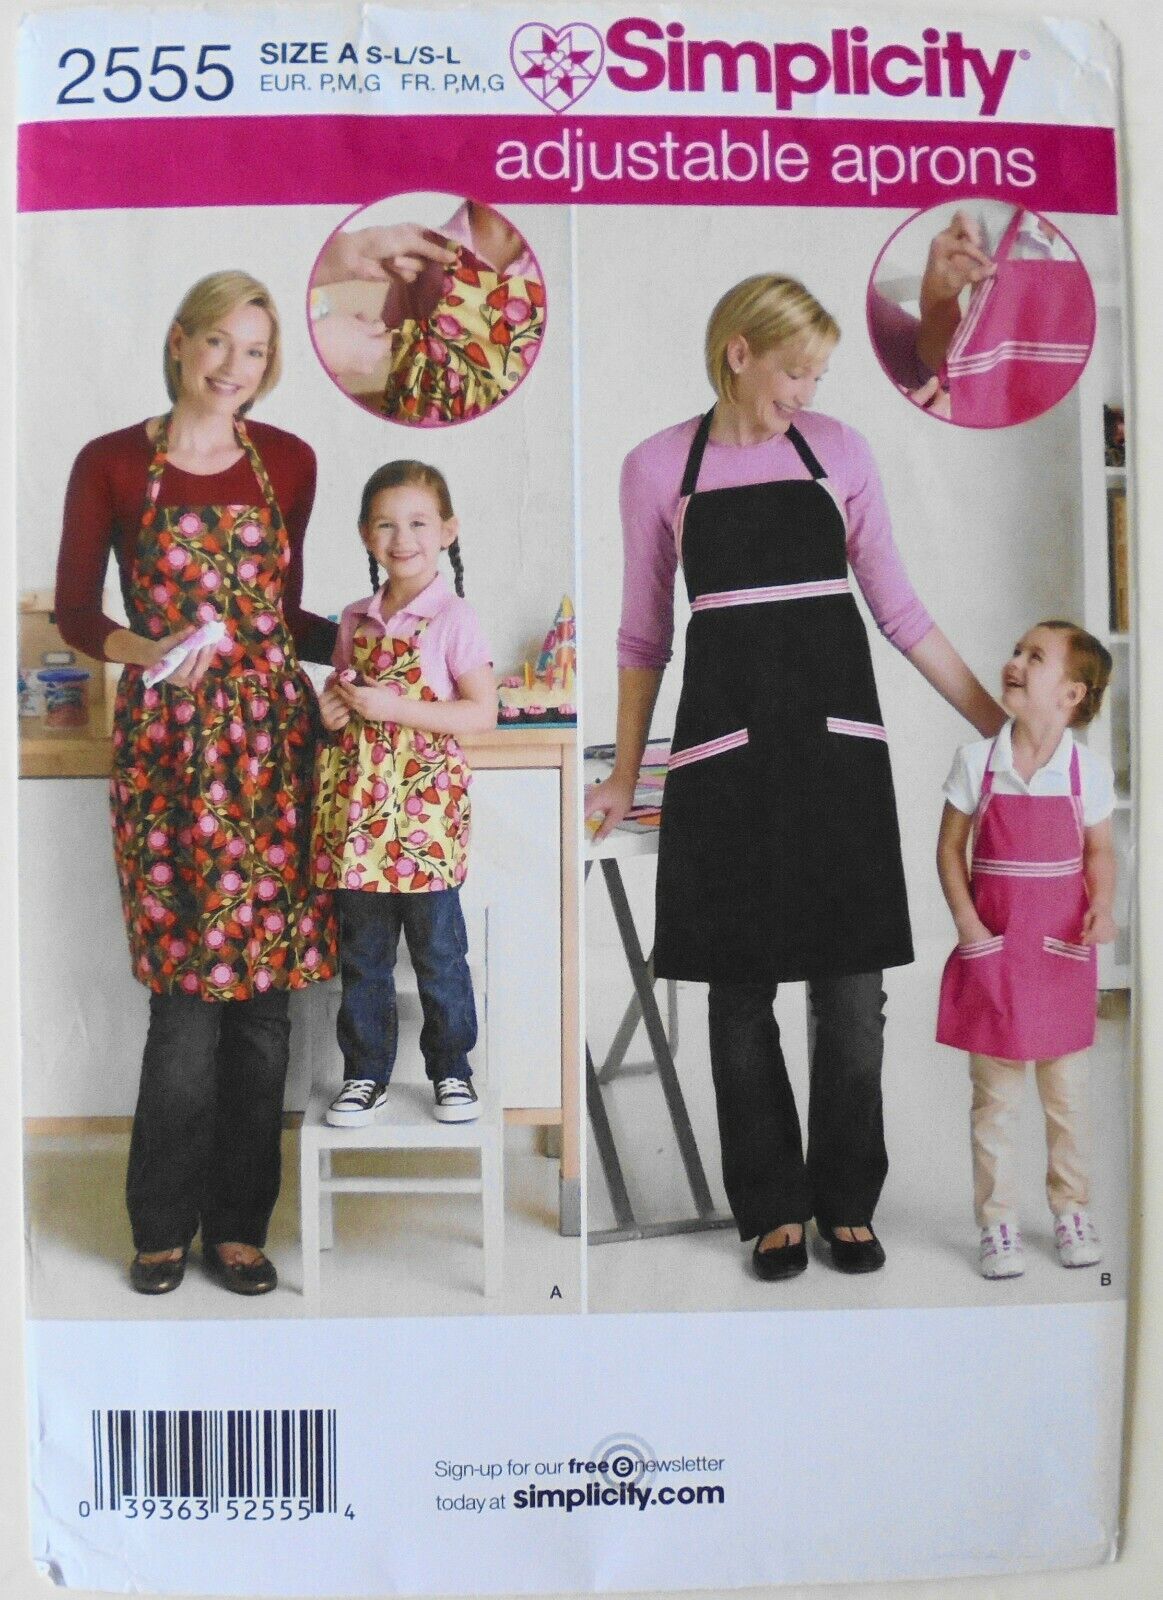 Simplicity 2555 Misses Girls Adjustable Aprons Sewing Pattern Sz 3-8/10-20